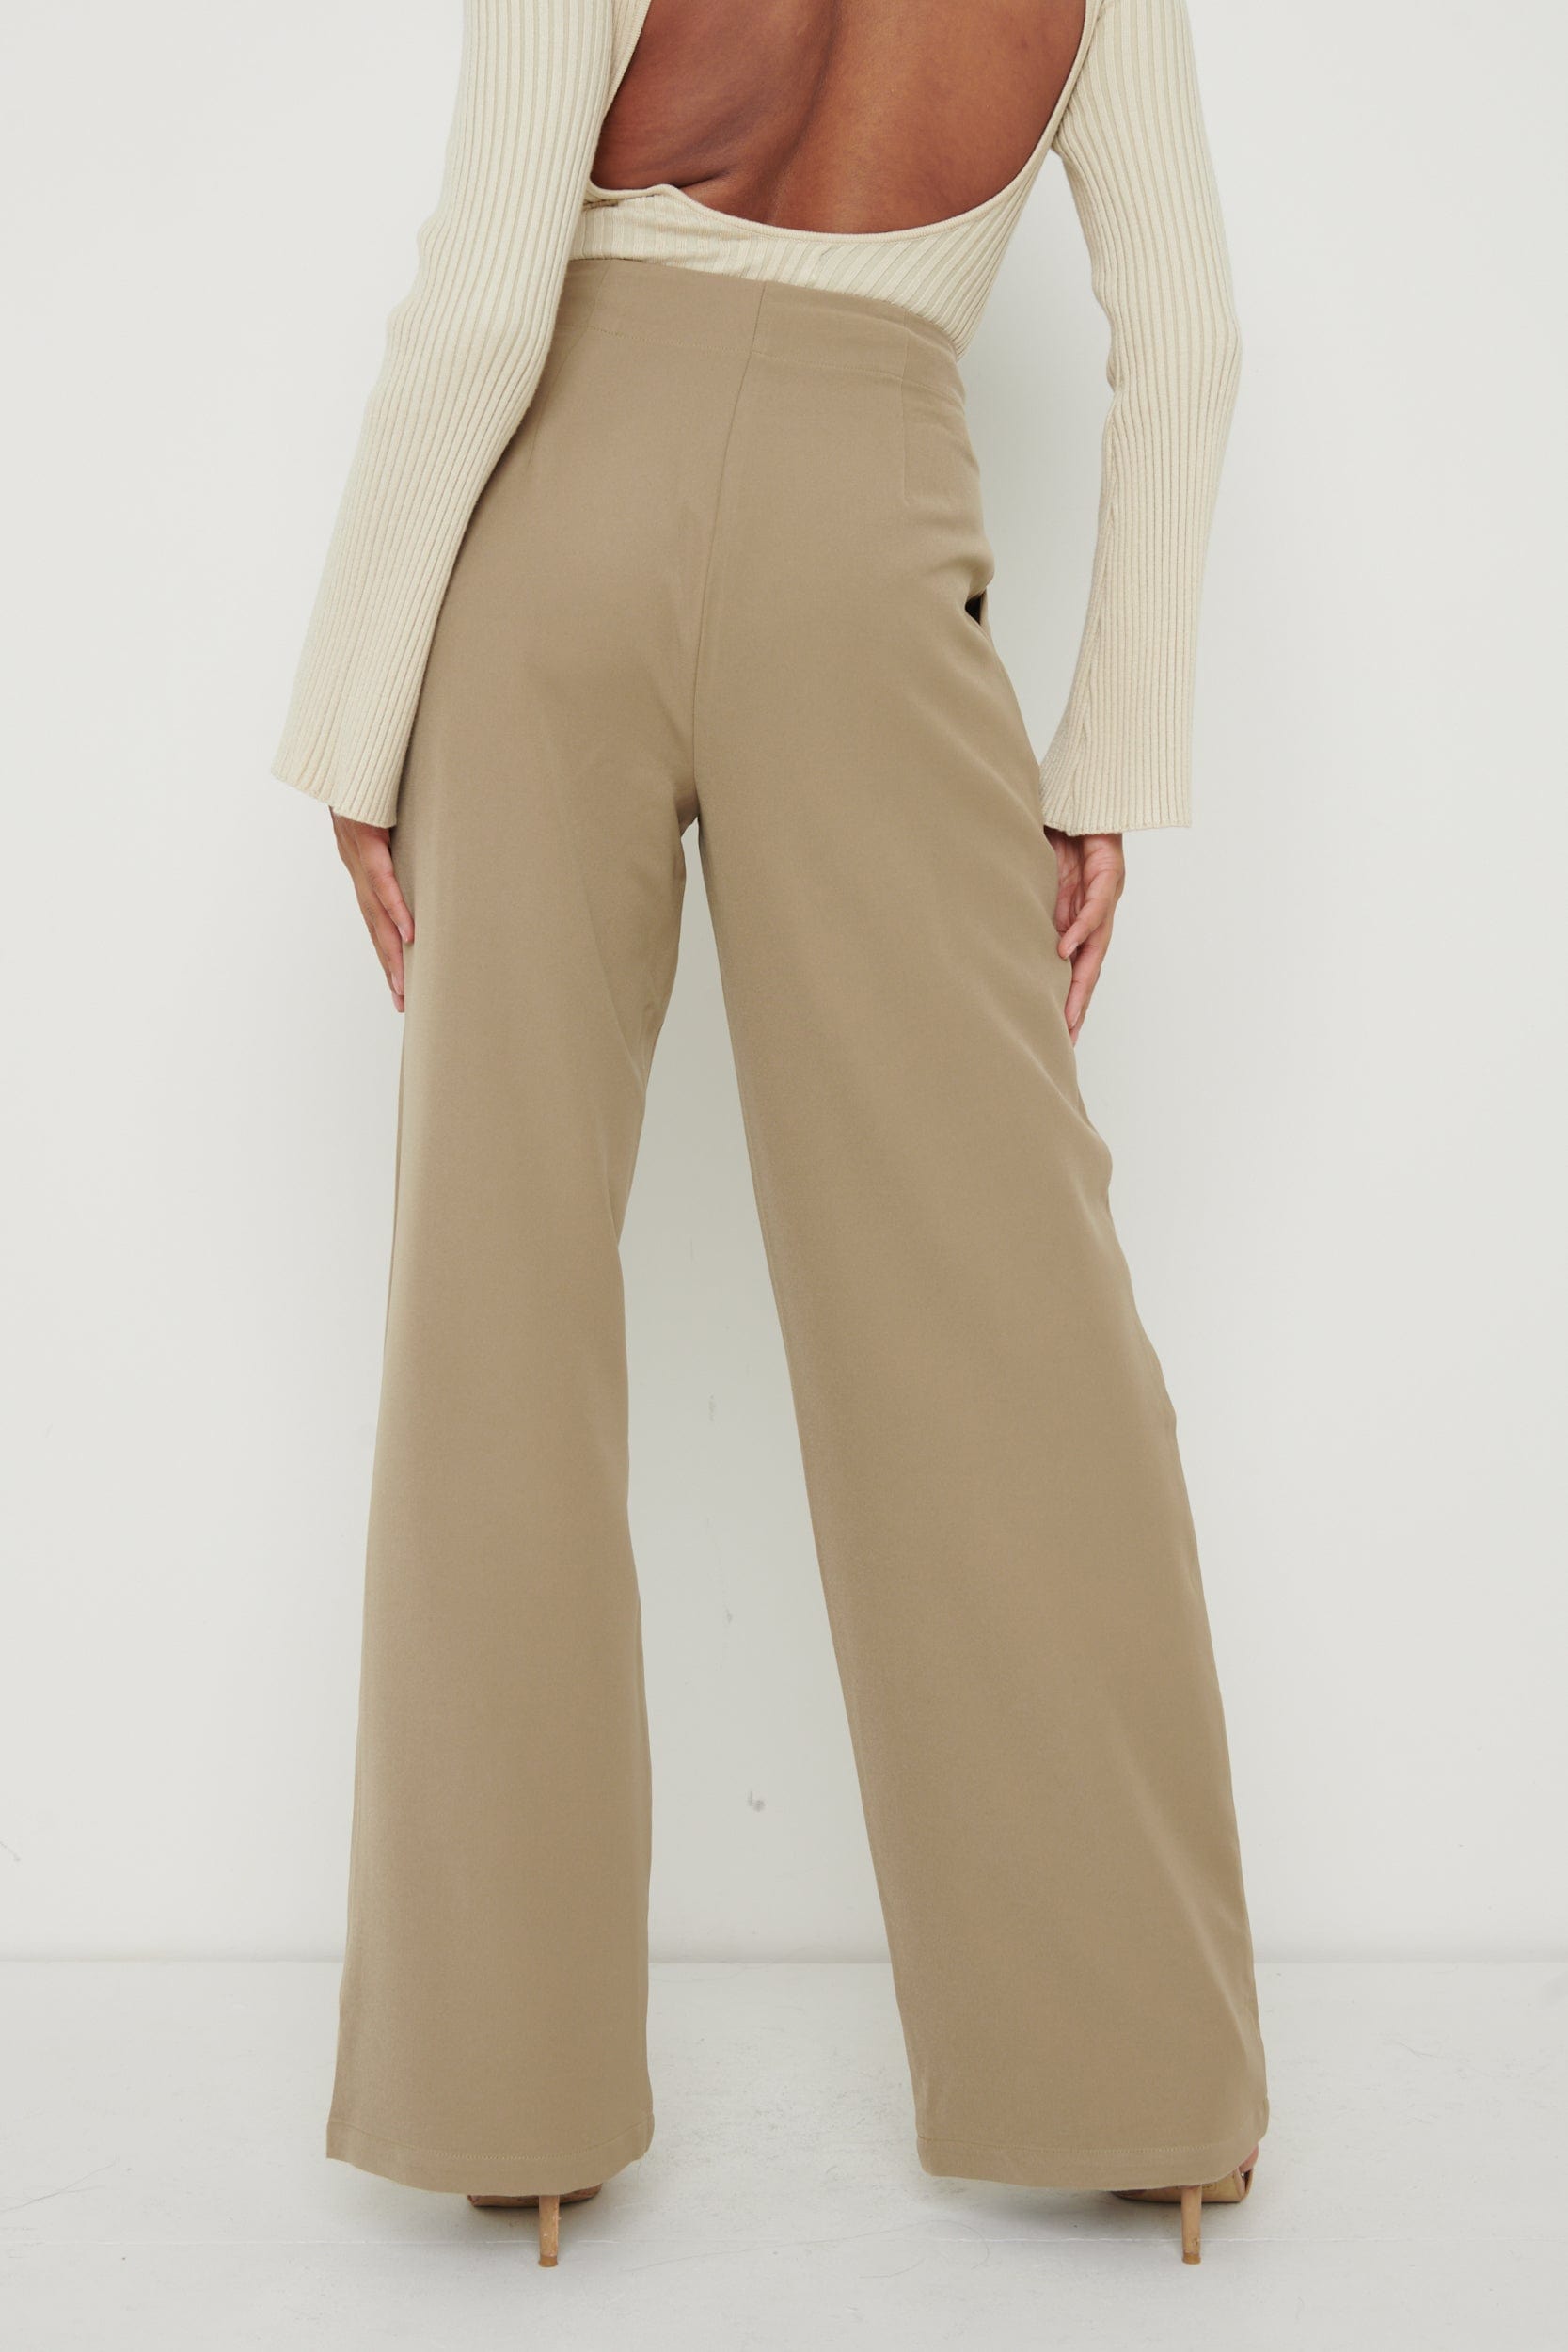 Parker High Waisted Box Pleat Trouser - Taupe